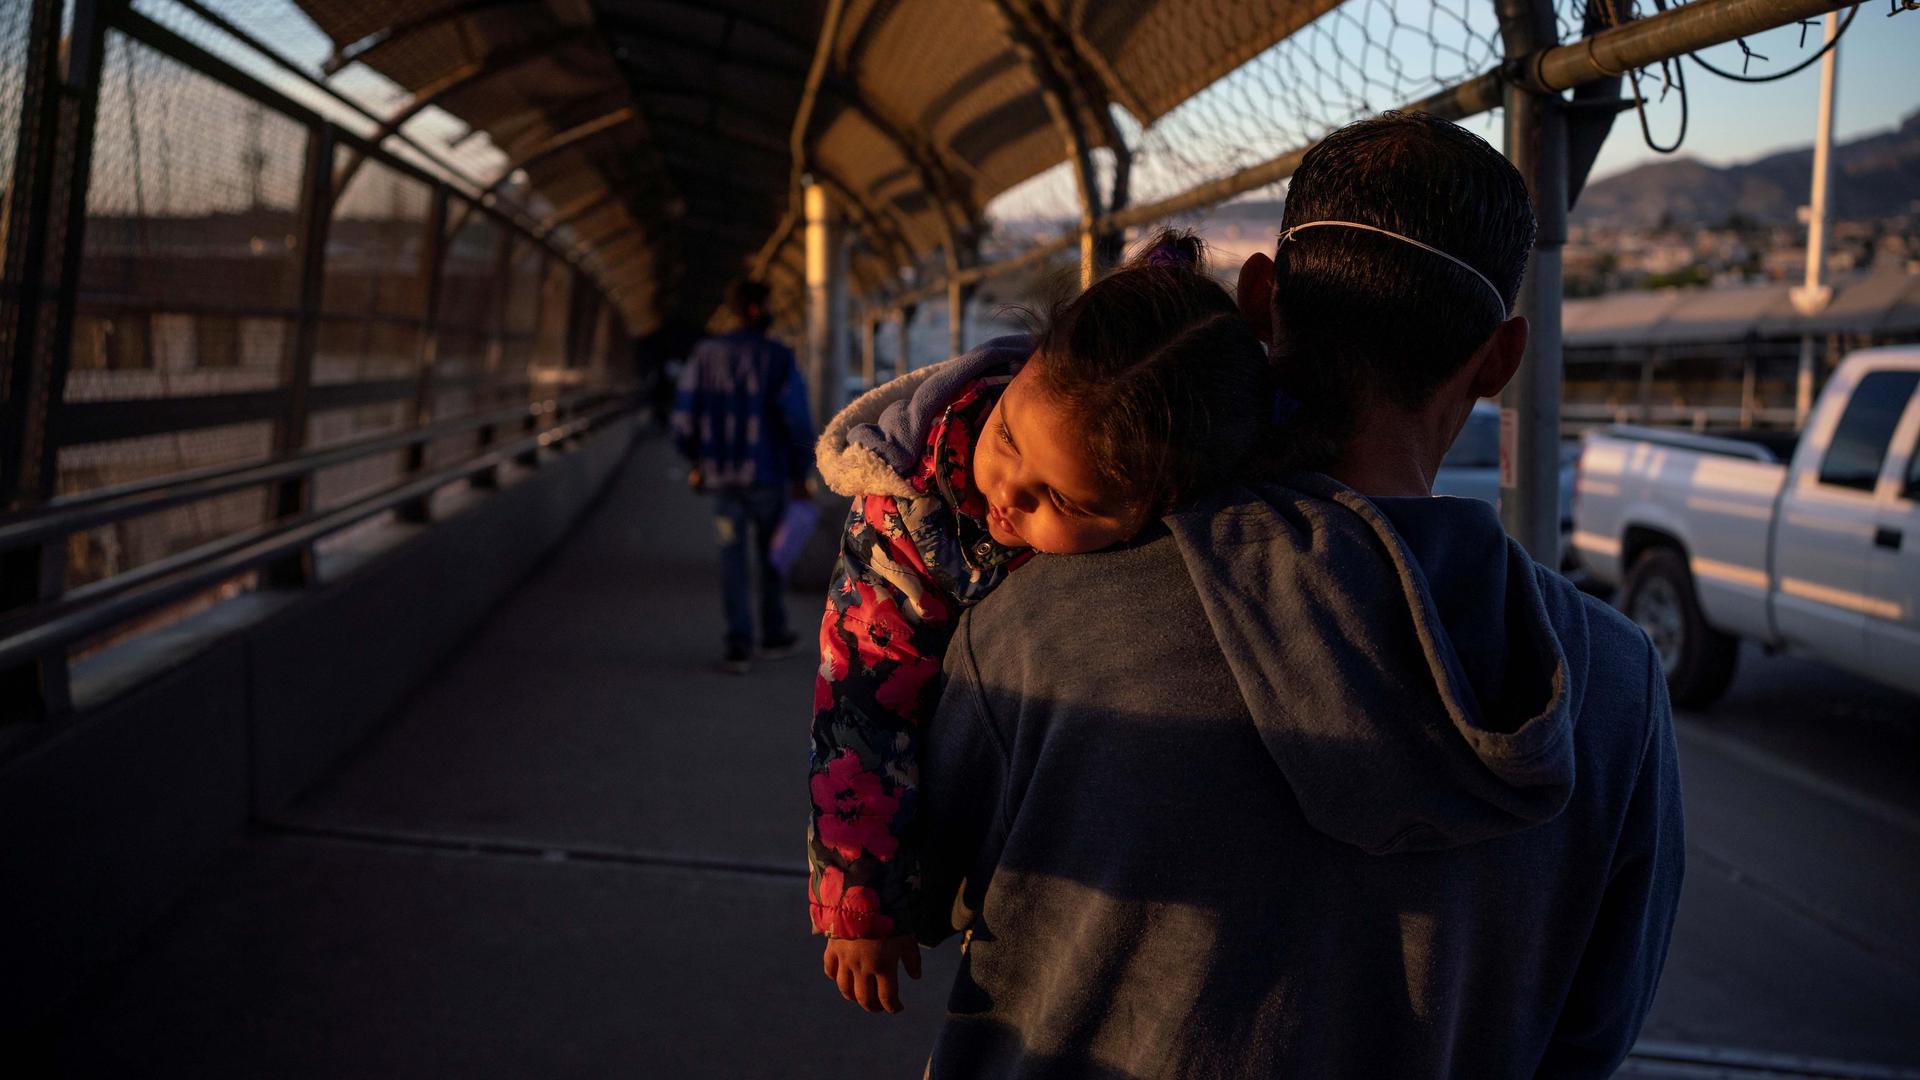 A migrant father and child returns to Ciudad Juárez after he had his family's court dates changed by Customs and Border Protection on the Paso del Norte International Bridge after court cancelations amid the coronavirus disease (COVID-19) outbreak in Ciud